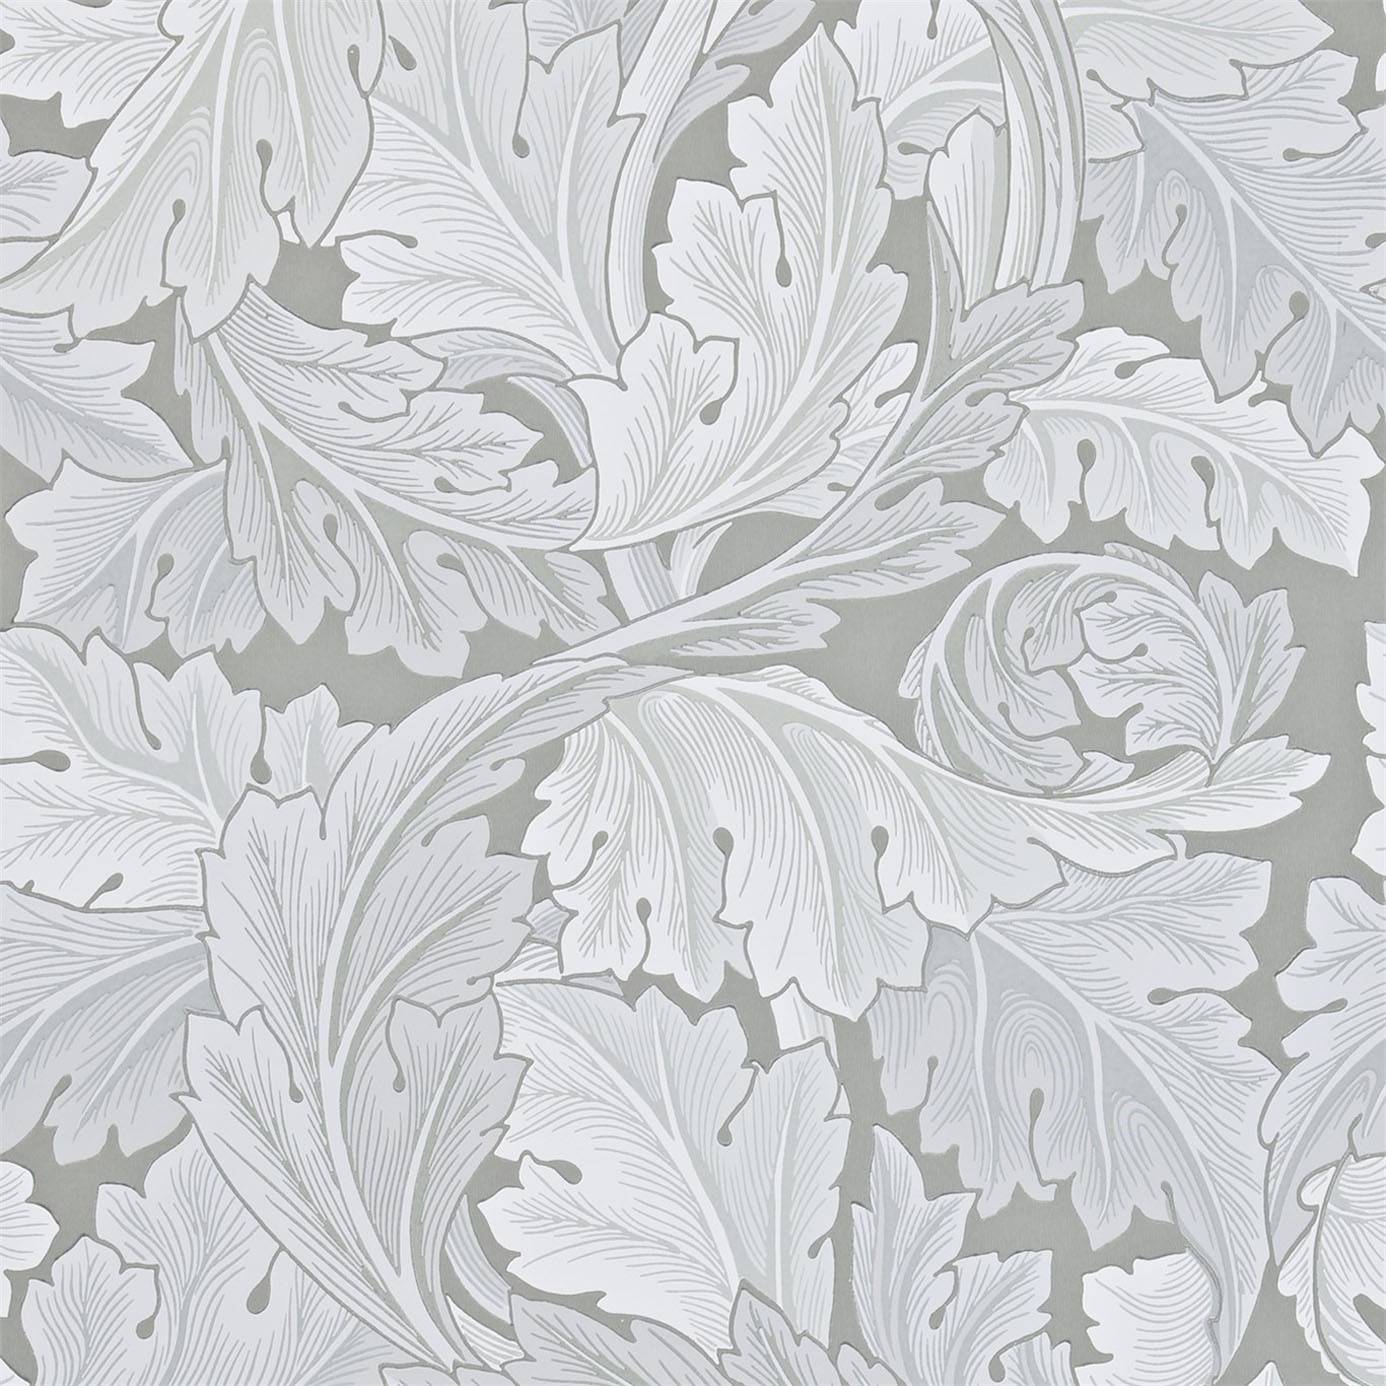 Wallpaper   Marble 212553   William Morris Co Archive 2 Wallpapers